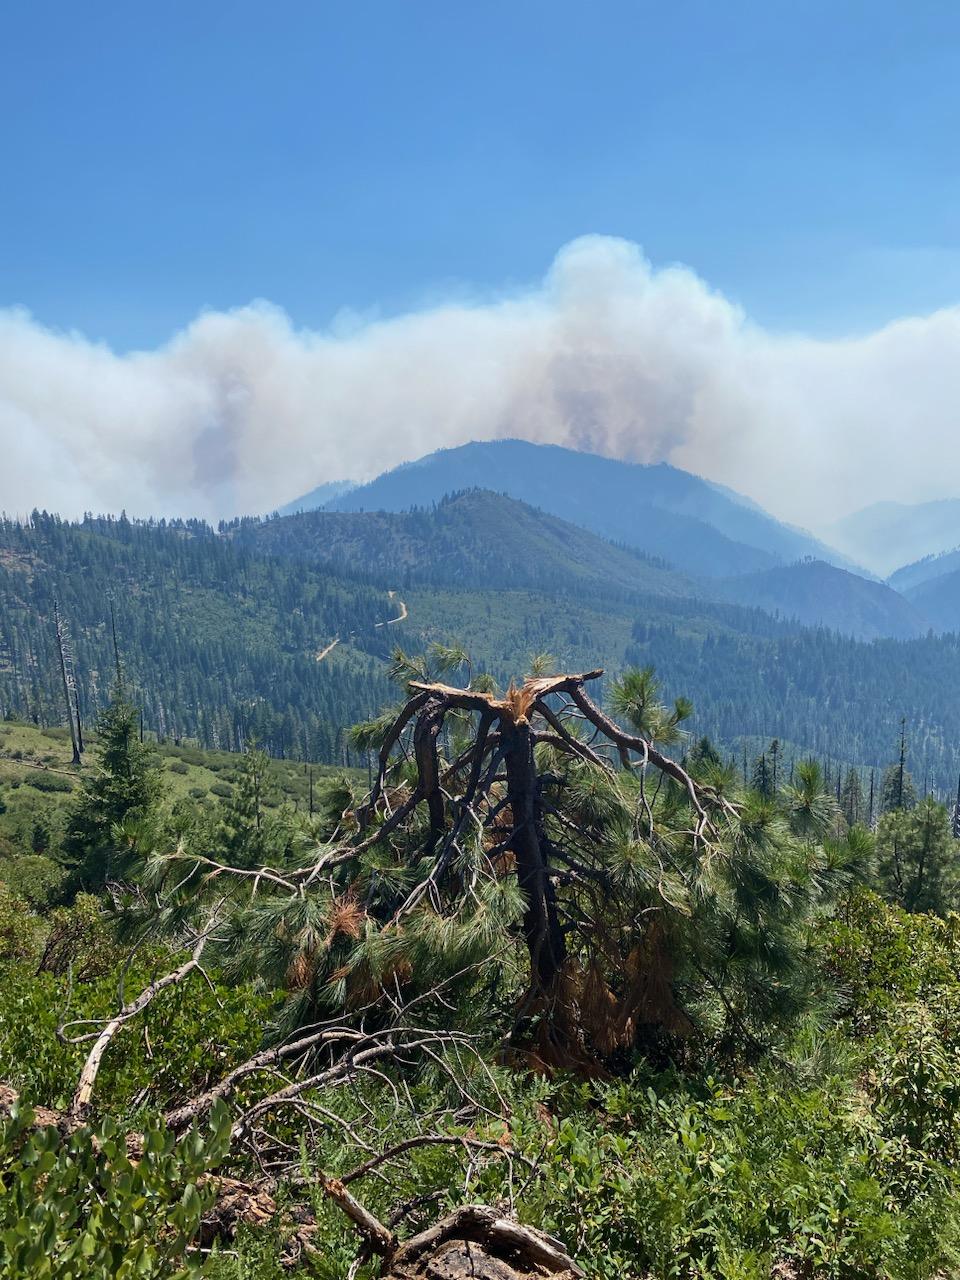 Image of an unburned lightning-struck tree with smoke above the mountains in the distance. Photo USDA Forest Service courtesy Garrett Hazelton